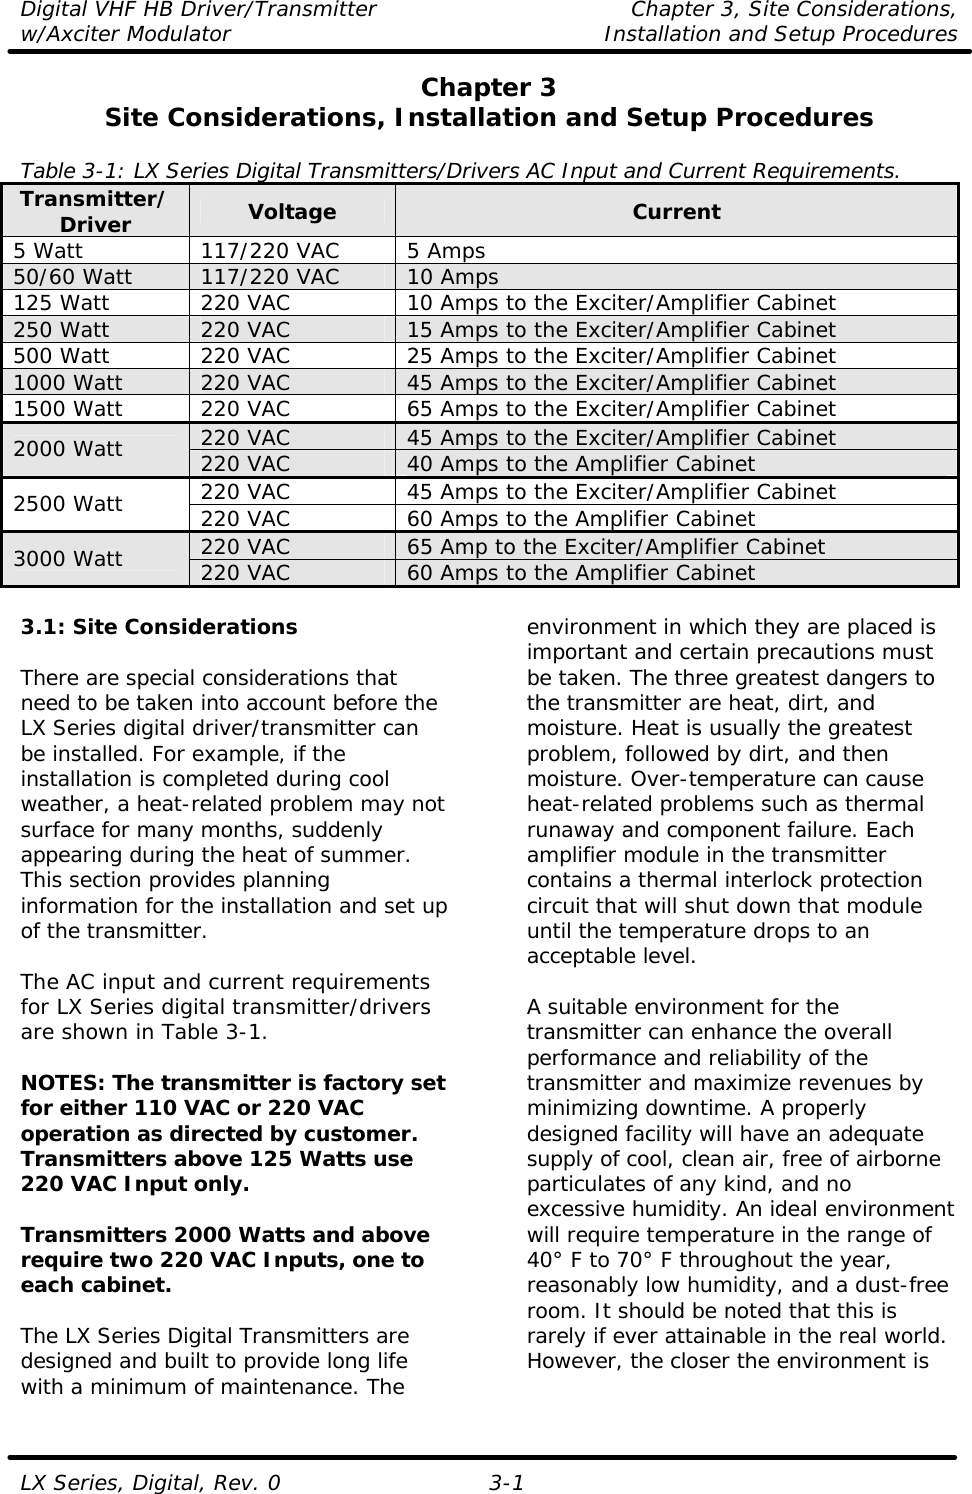 Digital VHF HB Driver/Transmitter Chapter 3, Site Considerations,  w/Axciter Modulator Installation and Setup Procedures  LX Series, Digital, Rev. 0 3-1 Chapter 3 Site Considerations, Installation and Setup Procedures  Table 3-1: LX Series Digital Transmitters/Drivers AC Input and Current Requirements. Transmitter/Driver Voltage Current 5 Watt 117/220 VAC 5 Amps 50/60 Watt 117/220 VAC 10 Amps 125 Watt 220 VAC 10 Amps to the Exciter/Amplifier Cabinet 250 Watt 220 VAC 15 Amps to the Exciter/Amplifier Cabinet 500 Watt 220 VAC 25 Amps to the Exciter/Amplifier Cabinet 1000 Watt 220 VAC 45 Amps to the Exciter/Amplifier Cabinet 1500 Watt 220 VAC 65 Amps to the Exciter/Amplifier Cabinet 220 VAC 45 Amps to the Exciter/Amplifier Cabinet 2000 Watt 220 VAC 40 Amps to the Amplifier Cabinet 220 VAC 45 Amps to the Exciter/Amplifier Cabinet 2500 Watt 220 VAC 60 Amps to the Amplifier Cabinet 220 VAC 65 Amp to the Exciter/Amplifier Cabinet 3000 Watt 220 VAC 60 Amps to the Amplifier Cabinet  3.1: Site Considerations  There are special considerations that need to be taken into account before the LX Series digital driver/transmitter can be installed. For example, if the installation is completed during cool weather, a heat-related problem may not surface for many months, suddenly appearing during the heat of summer. This section provides planning information for the installation and set up of the transmitter.  The AC input and current requirements for LX Series digital transmitter/drivers are shown in Table 3-1.  NOTES: The transmitter is factory set for either 110 VAC or 220 VAC operation as directed by customer.  Transmitters above 125 Watts use 220 VAC Input only.  Transmitters 2000 Watts and above require two 220 VAC Inputs, one to each cabinet.  The LX Series Digital Transmitters are designed and built to provide long life with a minimum of maintenance. The environment in which they are placed is important and certain precautions must be taken. The three greatest dangers to the transmitter are heat, dirt, and moisture. Heat is usually the greatest problem, followed by dirt, and then moisture. Over-temperature can cause heat-related problems such as thermal runaway and component failure. Each amplifier module in the transmitter contains a thermal interlock protection circuit that will shut down that module until the temperature drops to an acceptable level.  A suitable environment for the transmitter can enhance the overall performance and reliability of the transmitter and maximize revenues by minimizing downtime. A properly designed facility will have an adequate supply of cool, clean air, free of airborne particulates of any kind, and no excessive humidity. An ideal environment will require temperature in the range of 40° F to 70° F throughout the year, reasonably low humidity, and a dust-free room. It should be noted that this is rarely if ever attainable in the real world. However, the closer the environment is 